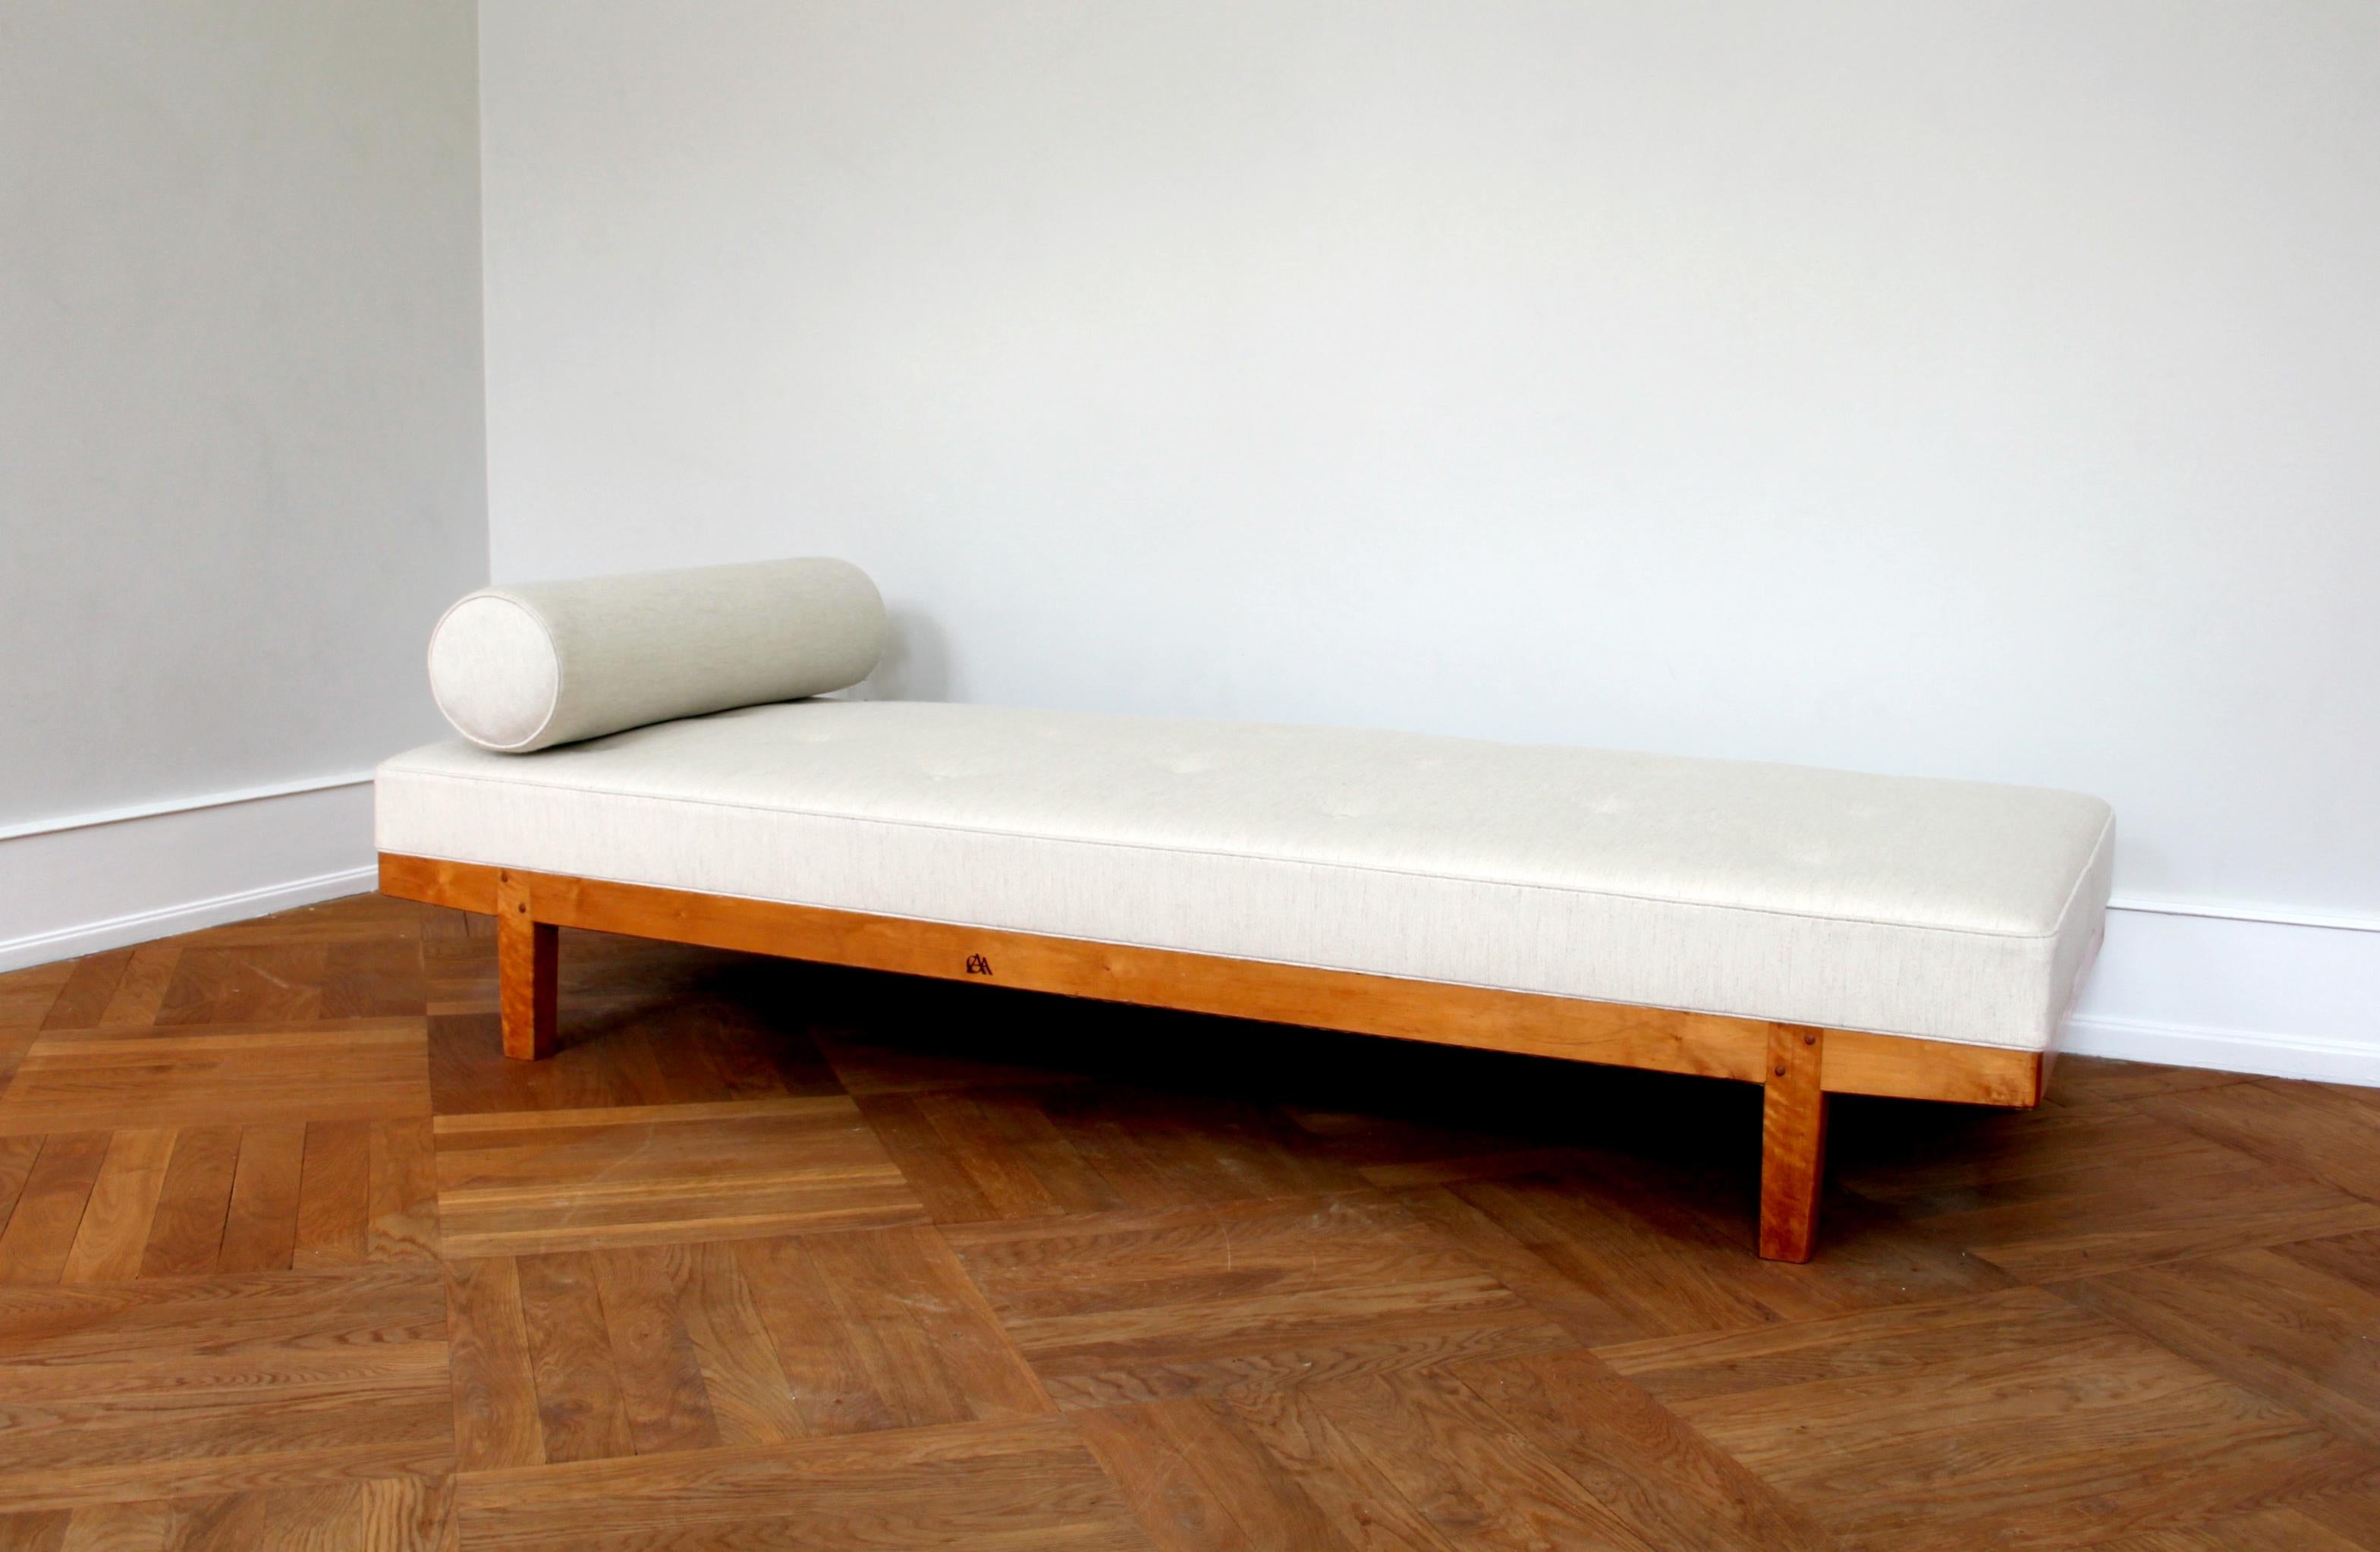 Carl-Axel Acking - Mid-Century Modern design - Scandinavia

Unika daybed by Carl-Axel Acking marked with designer’s signature.

Birch frame with CAA branded in front. Seat and cushion newly upholstered in Savak wool.

Size: 75 cm D x 192 cm W x 45